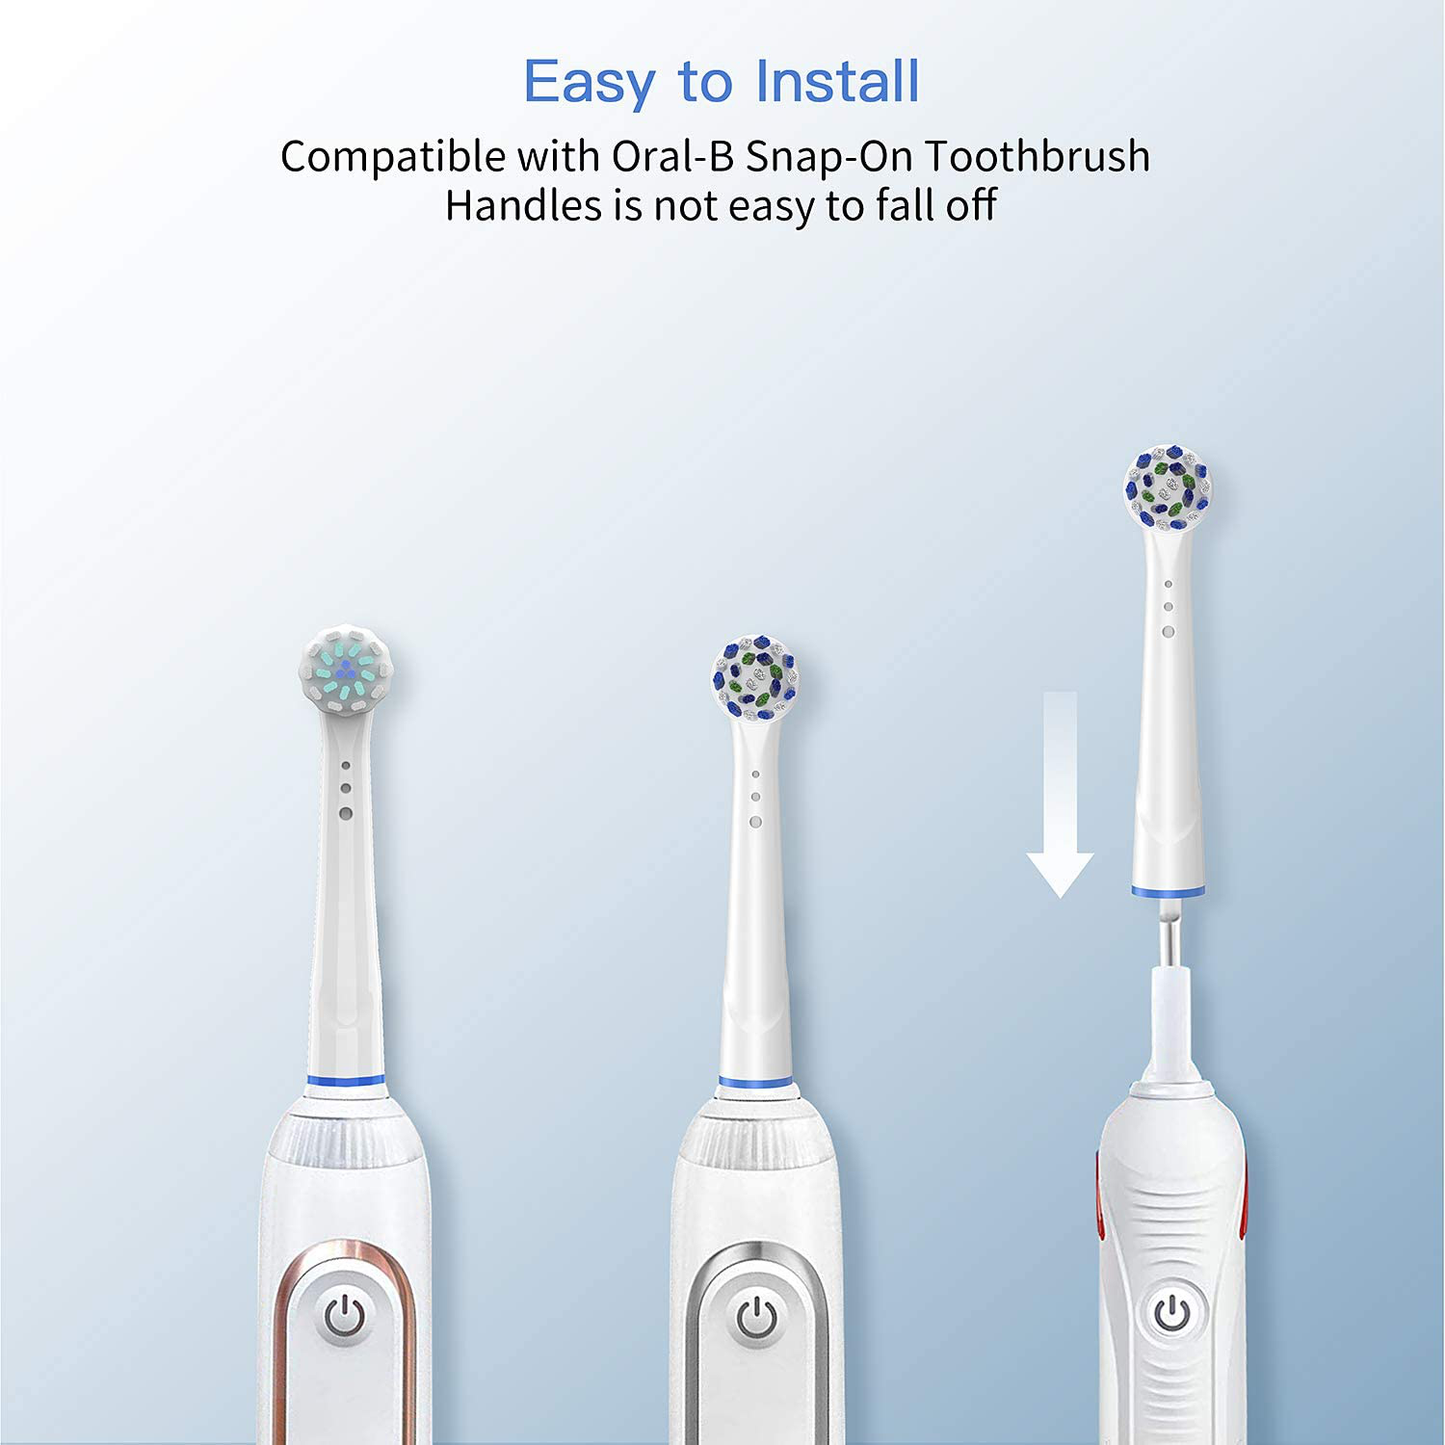 Replacement Toothbrush Heads for Oral B Braun, Precision Clean Brush Heads Refill Compatible with Oral-B 7000/Pro 1000/9600/ 5000/3000/8000